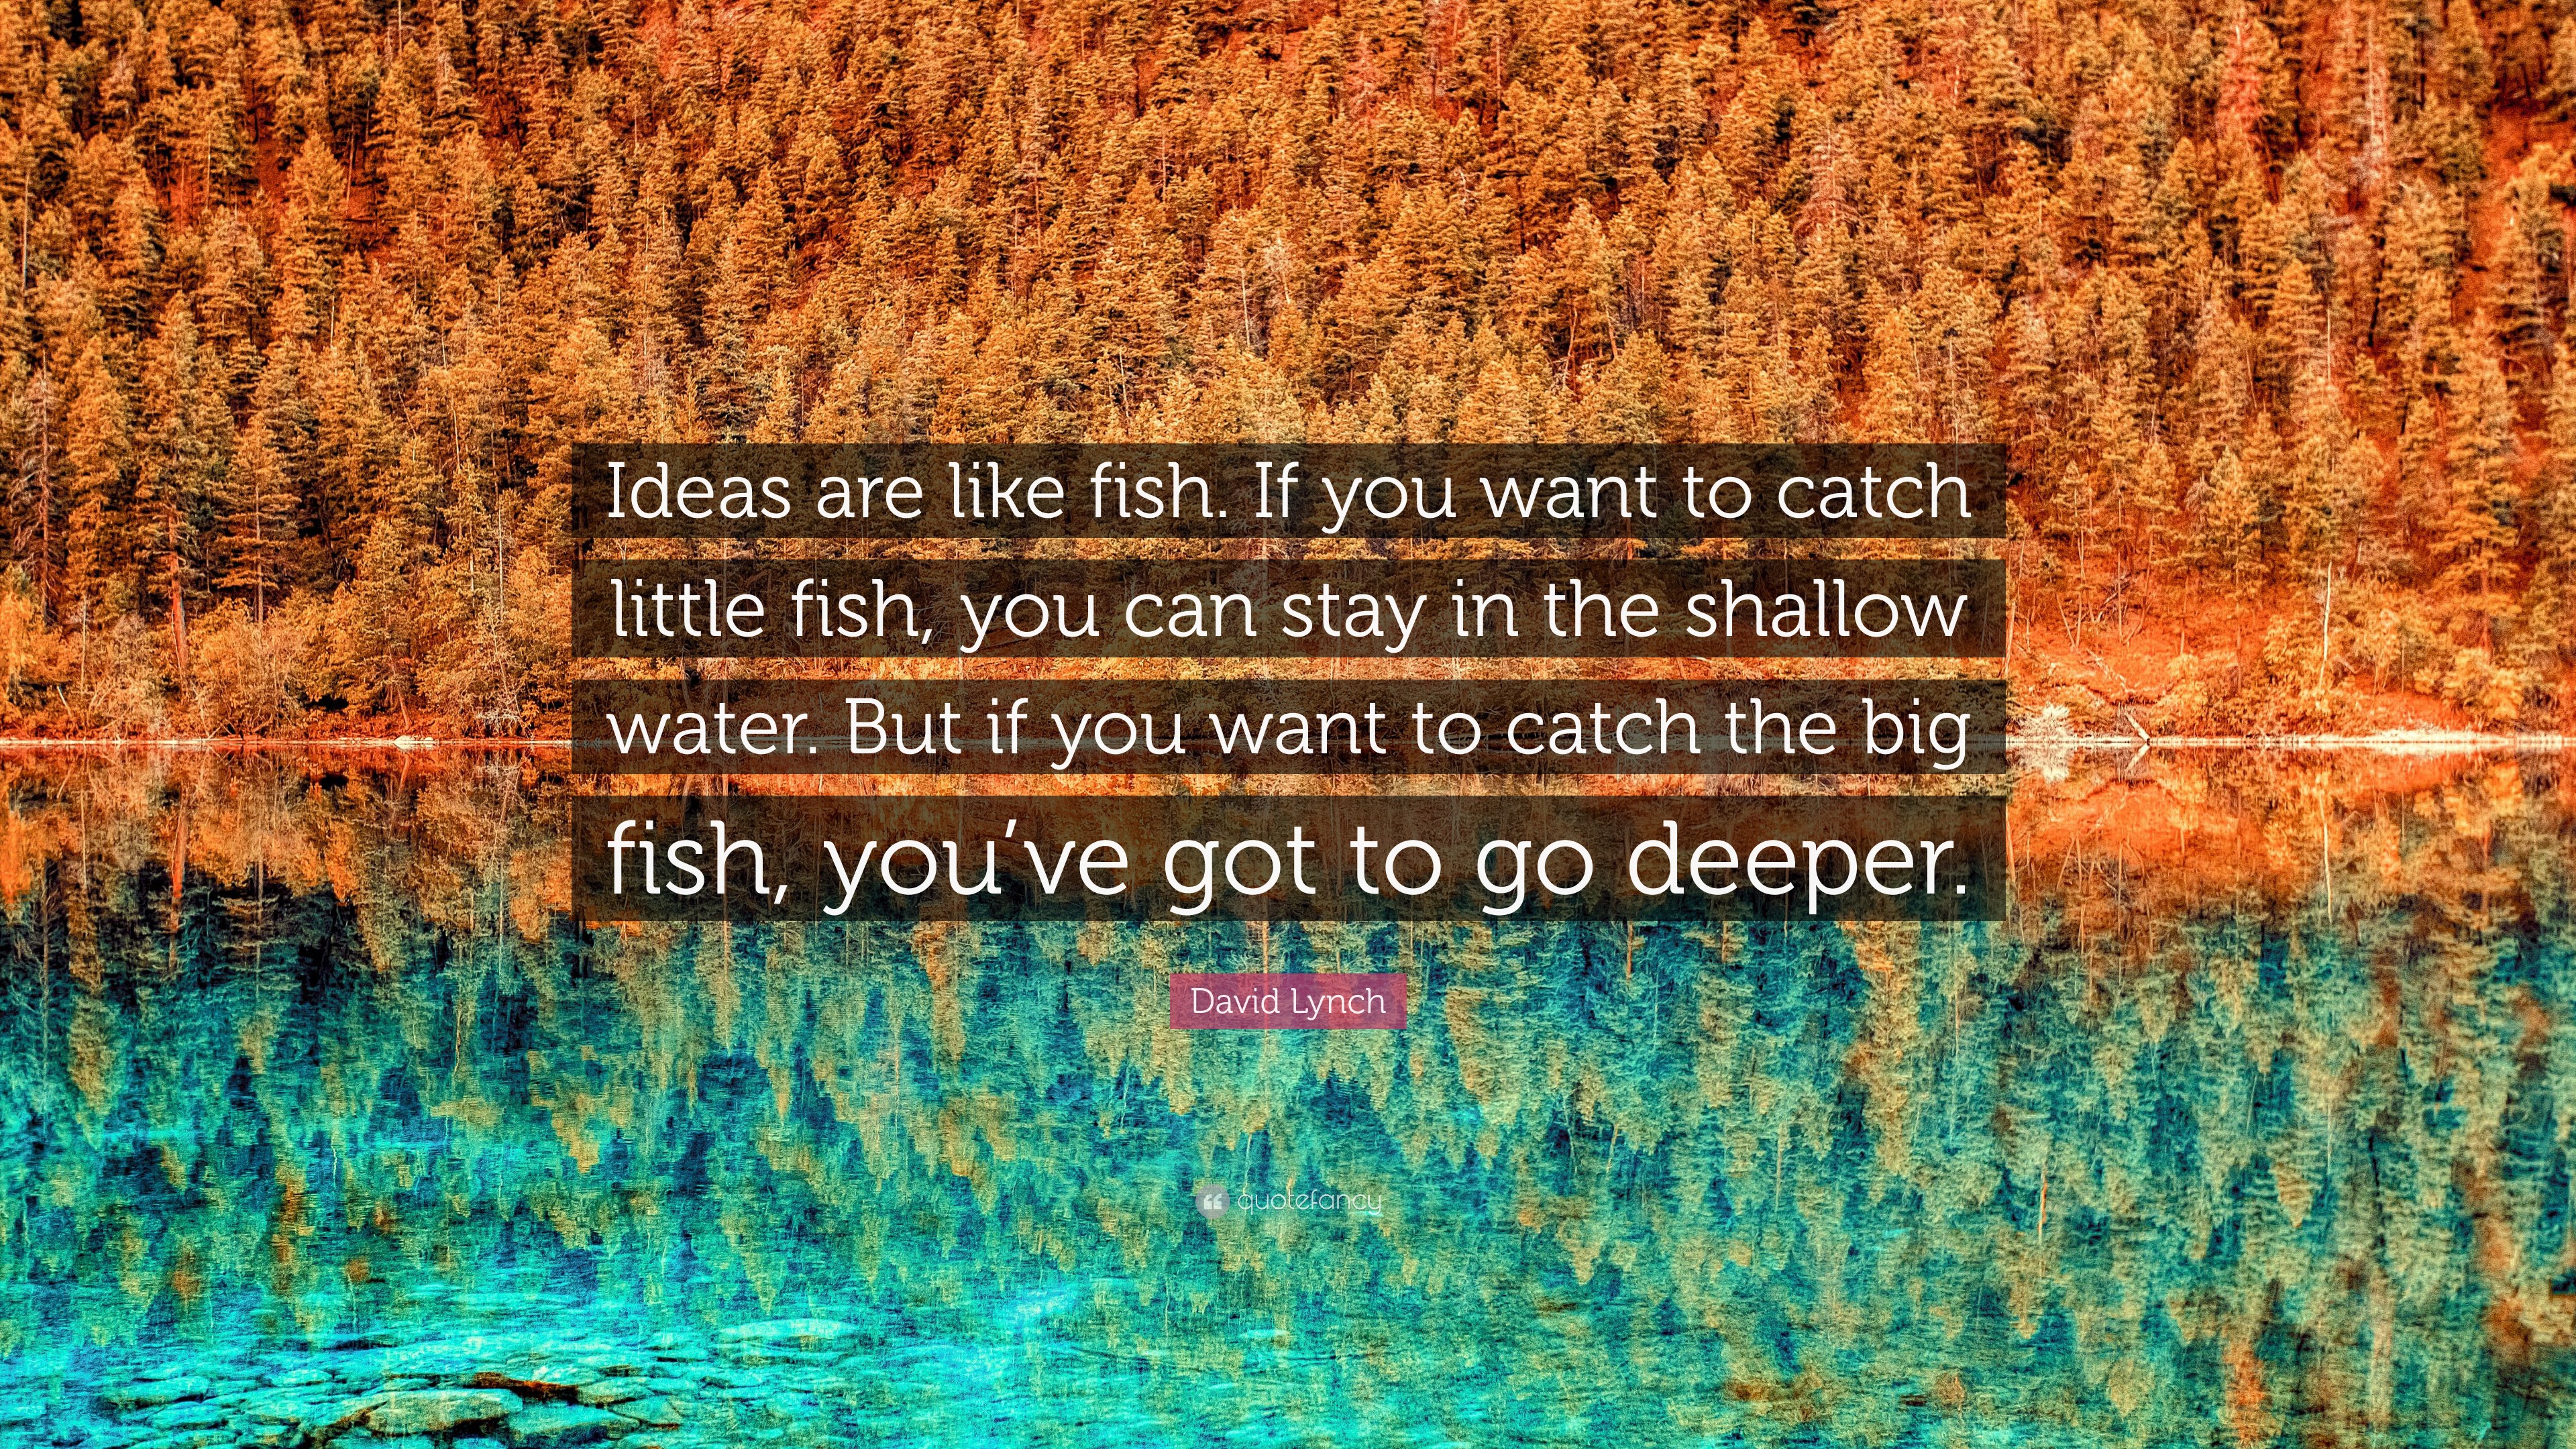 https://quotefancy.com/media/wallpaper/3840x2160/7114351-David-Lynch-Quote-Ideas-are-like-fish-If-you-want-to-catch-little.jpg